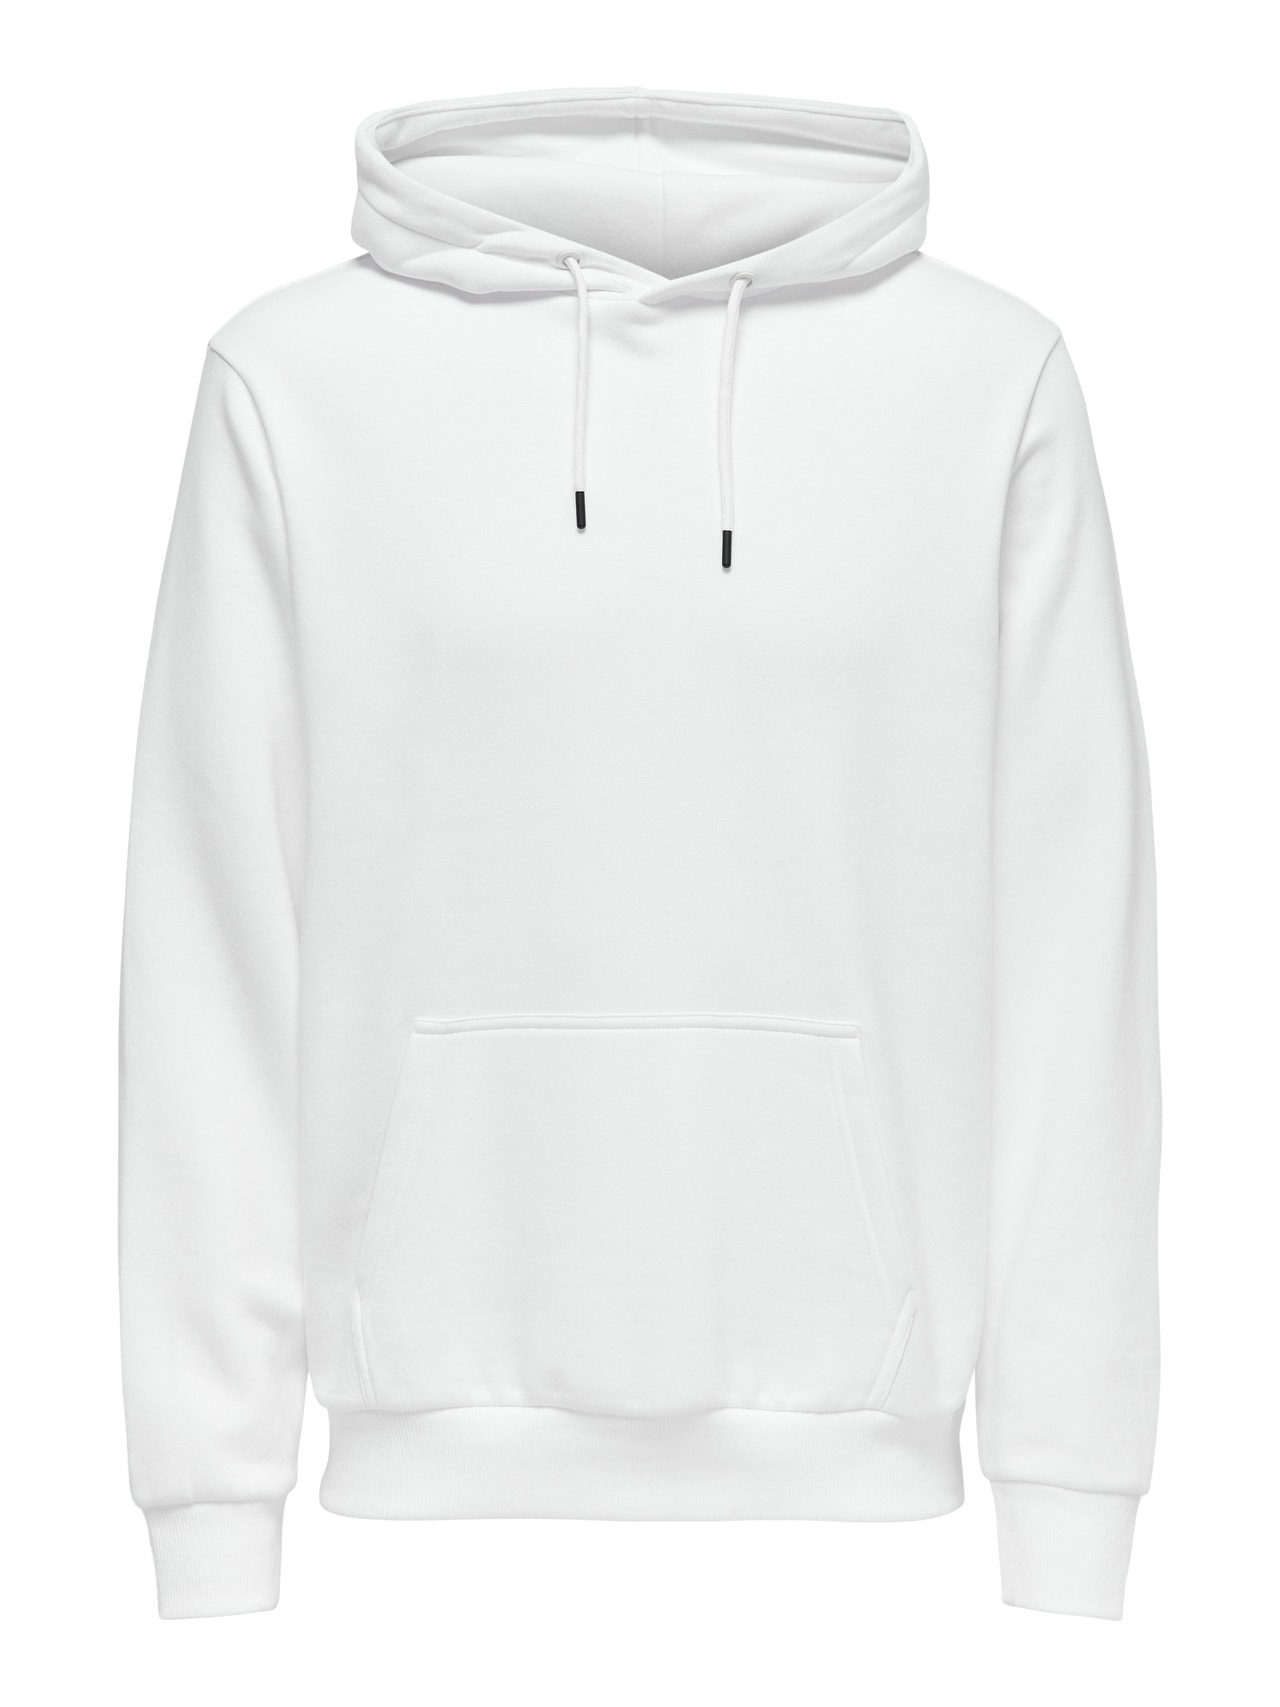 ONLY & SONS Regular Fit Hoodie Sweatshirts -Bright White - 22018685